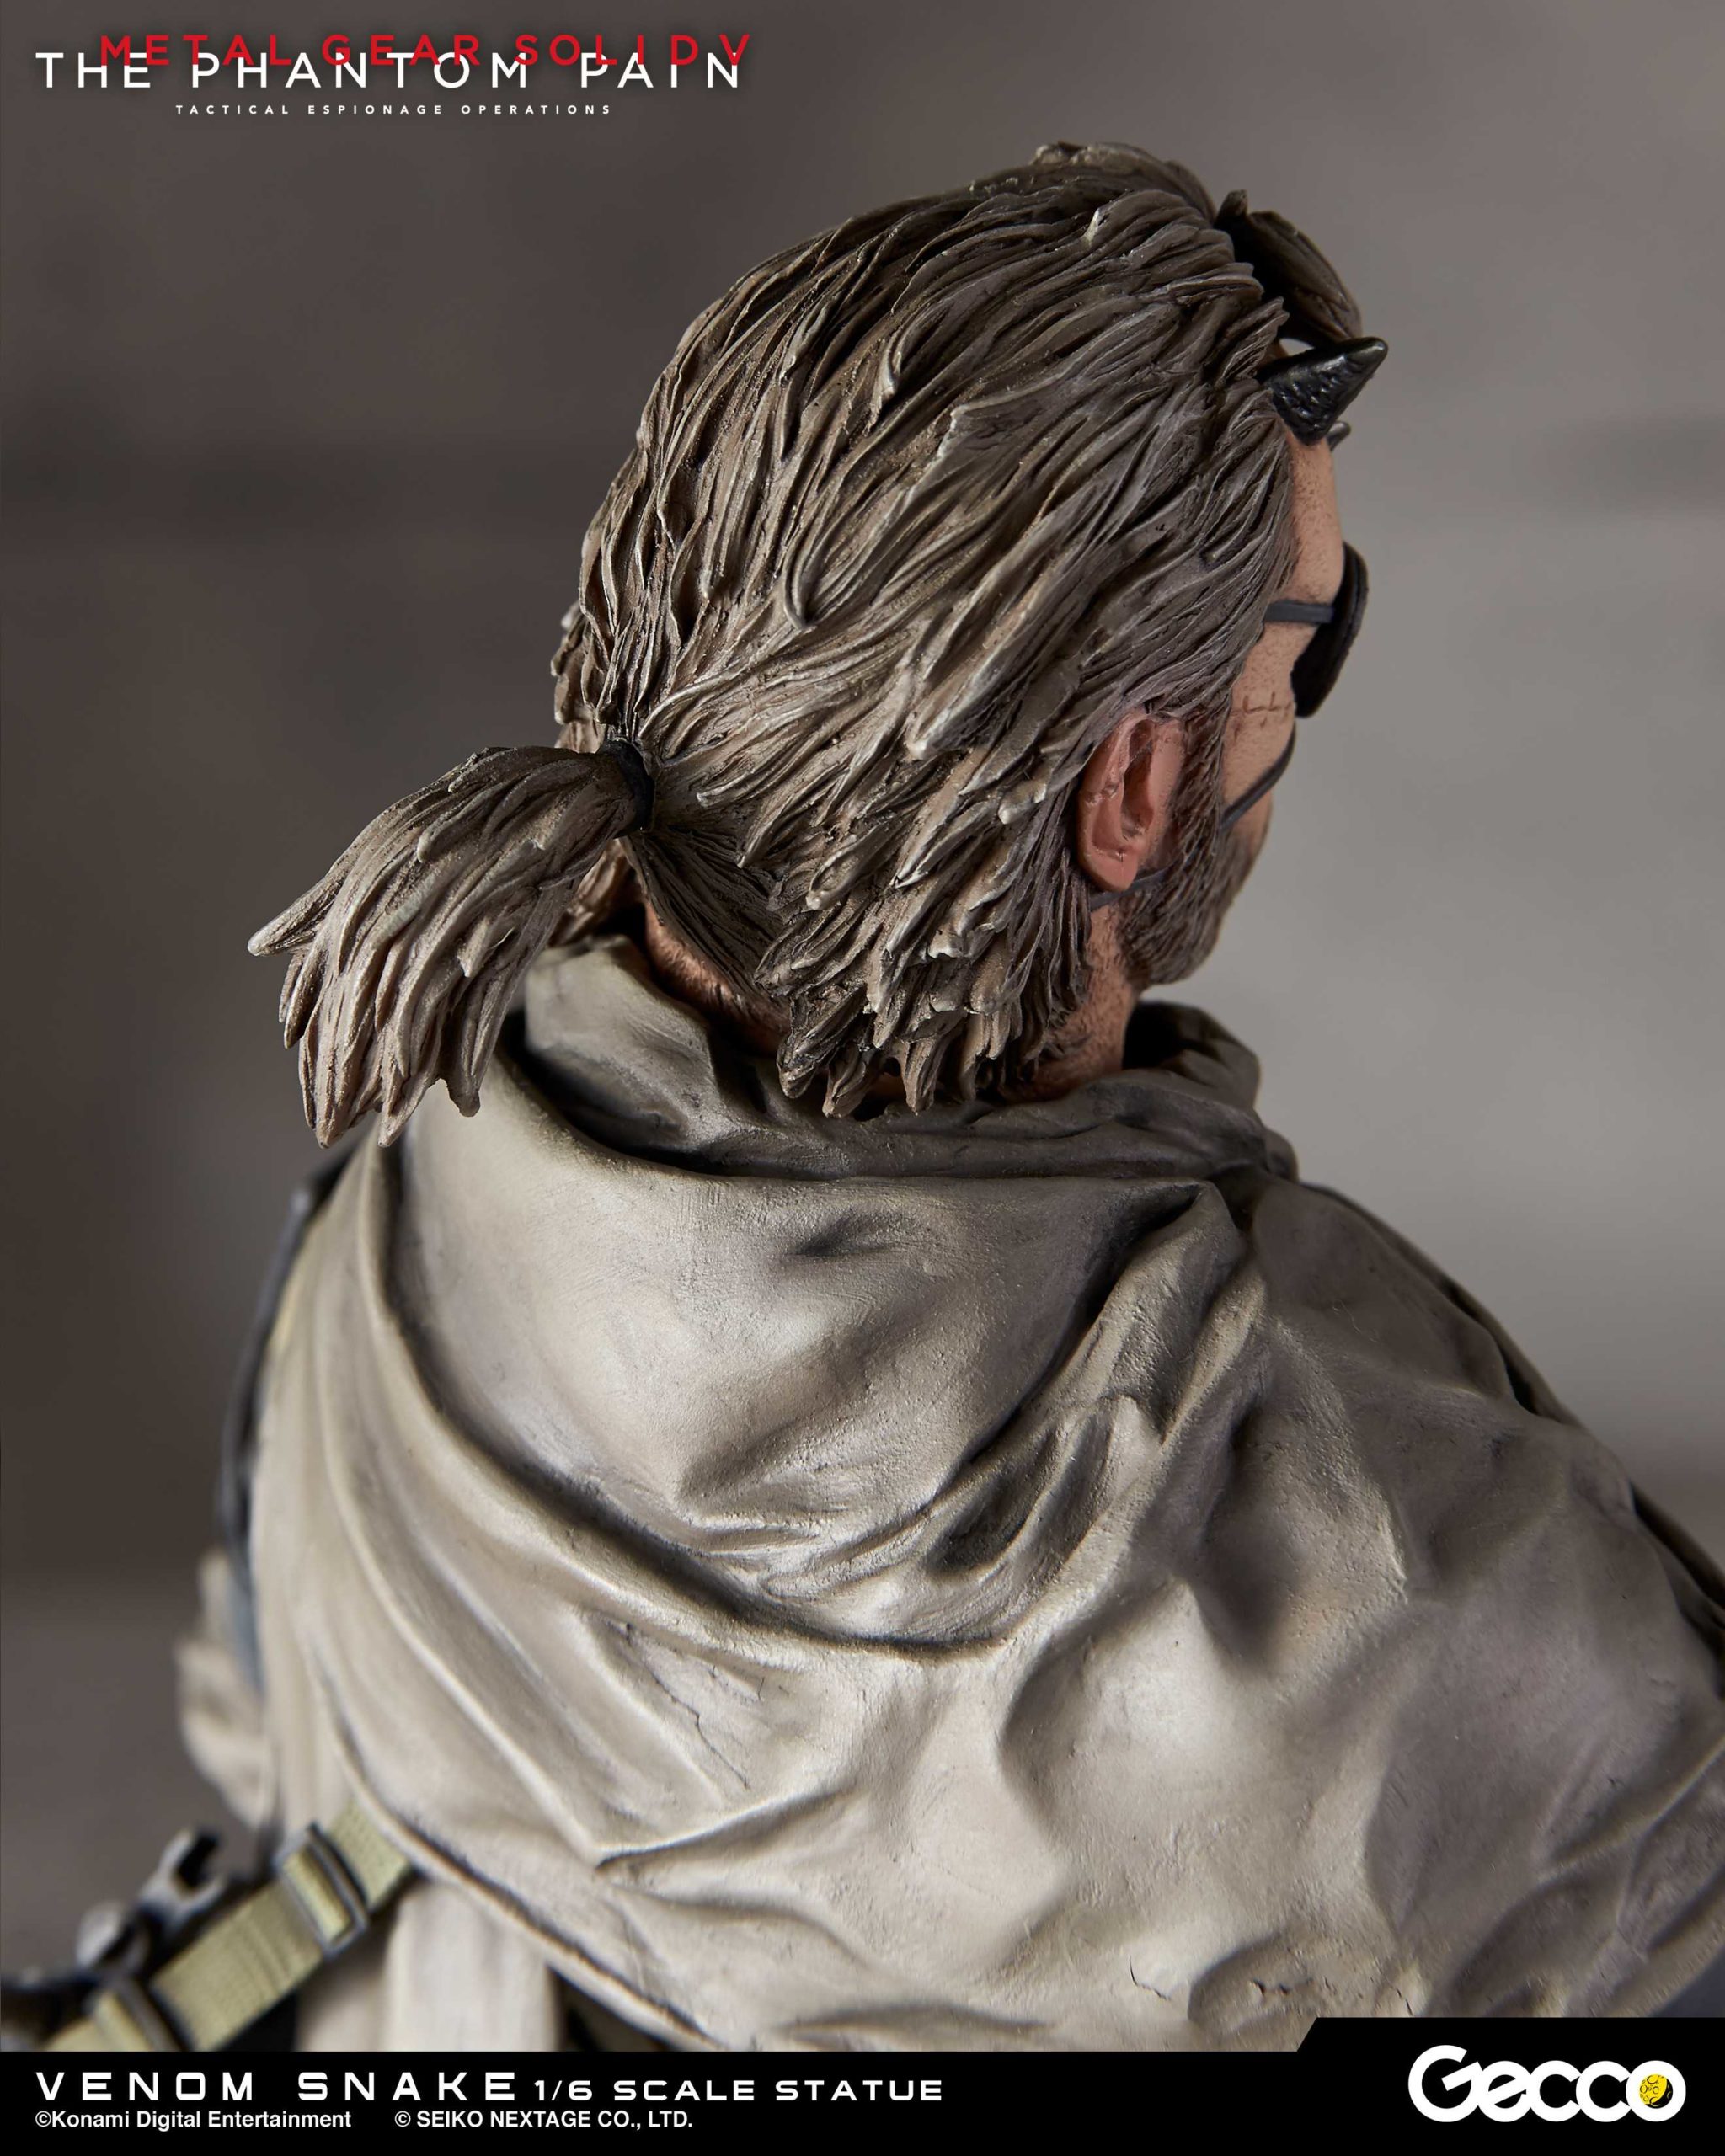 $300 Statue Of Metal Gear Solid V’s Venom Snake Includes Cute Puppy